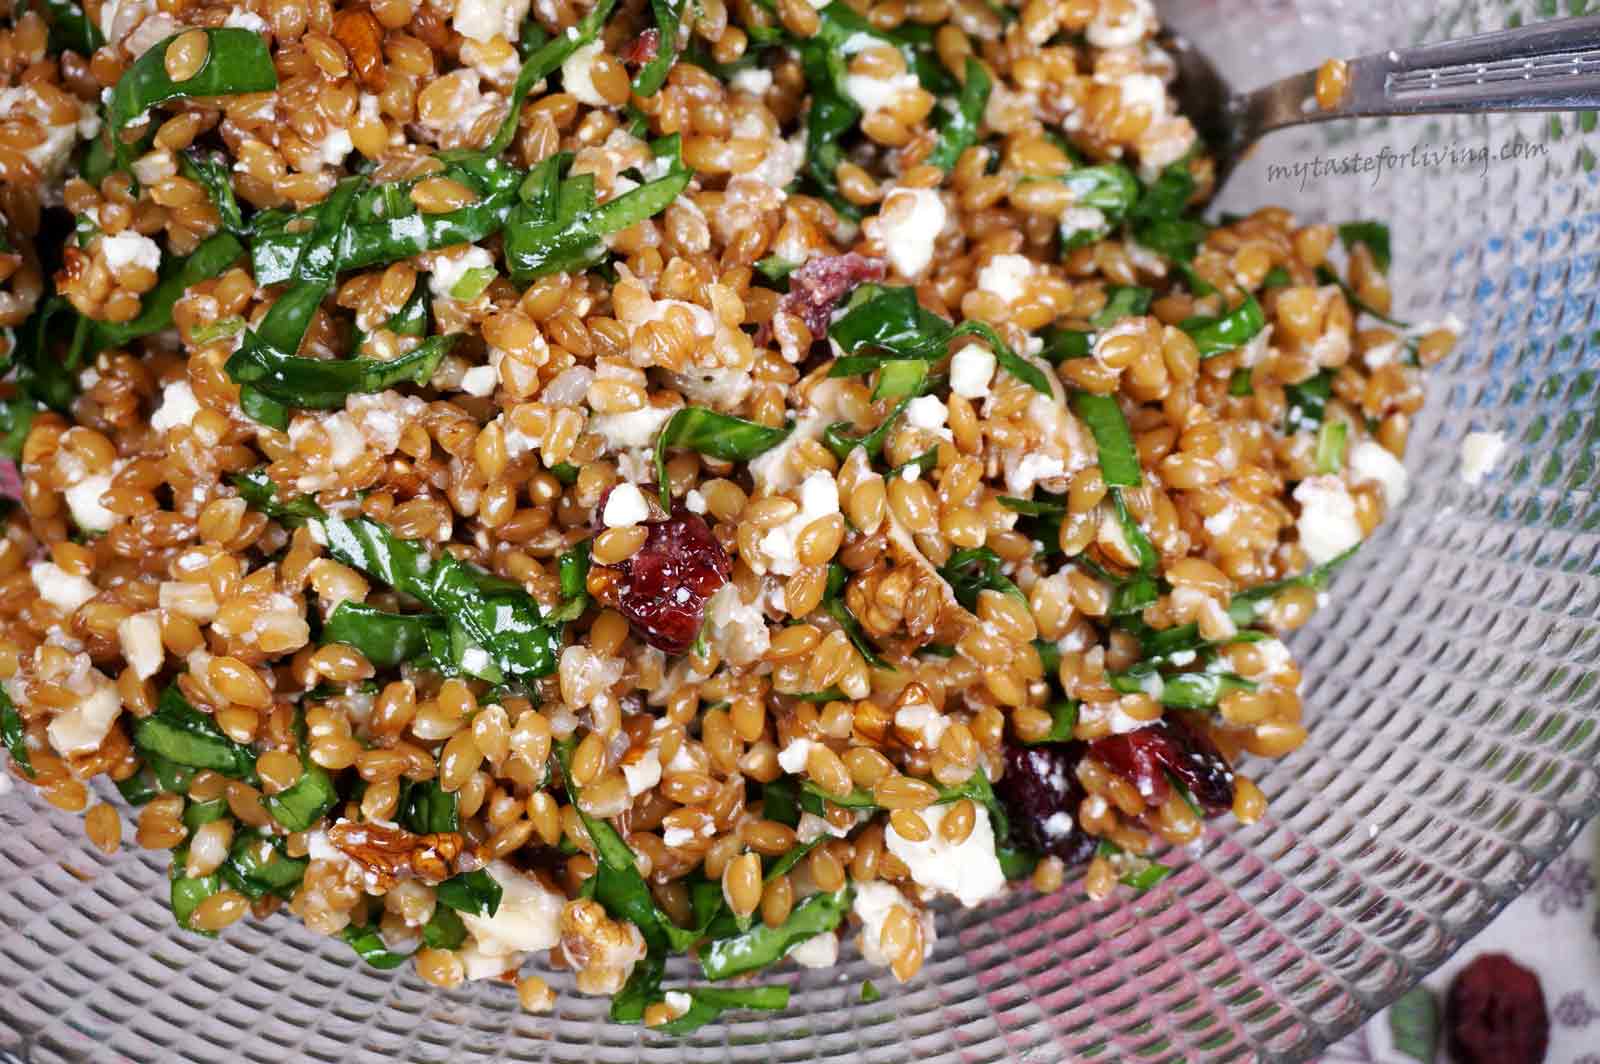 Salad with einkorn, spinach, cranberries and walnuts, flavoured with lemon juice, extra virgin olive oil, honey (or maple syrup), a little mustard and grated feta cheese. If you want the salad to be vegan, you can skip the cheese.